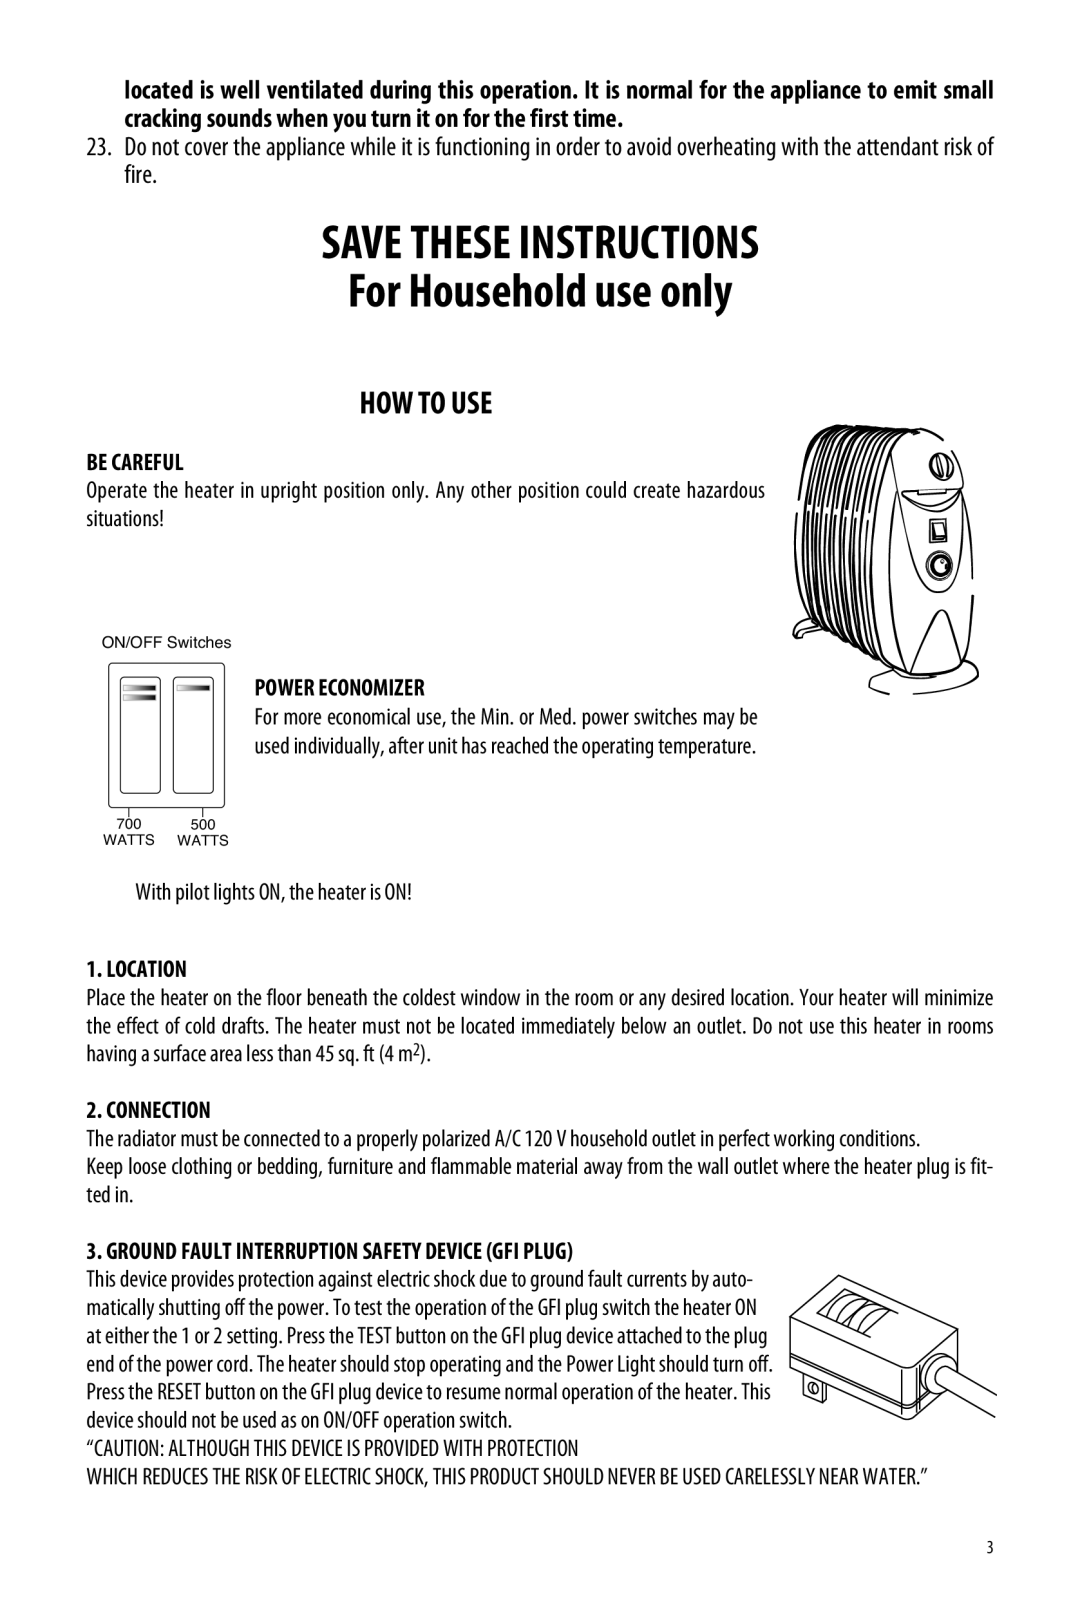 DeLonghi TRN0812T manual SAVE THESE INSTRUCTIONS For Household use only, How To Use, Be Careful, Power Economizer, Location 